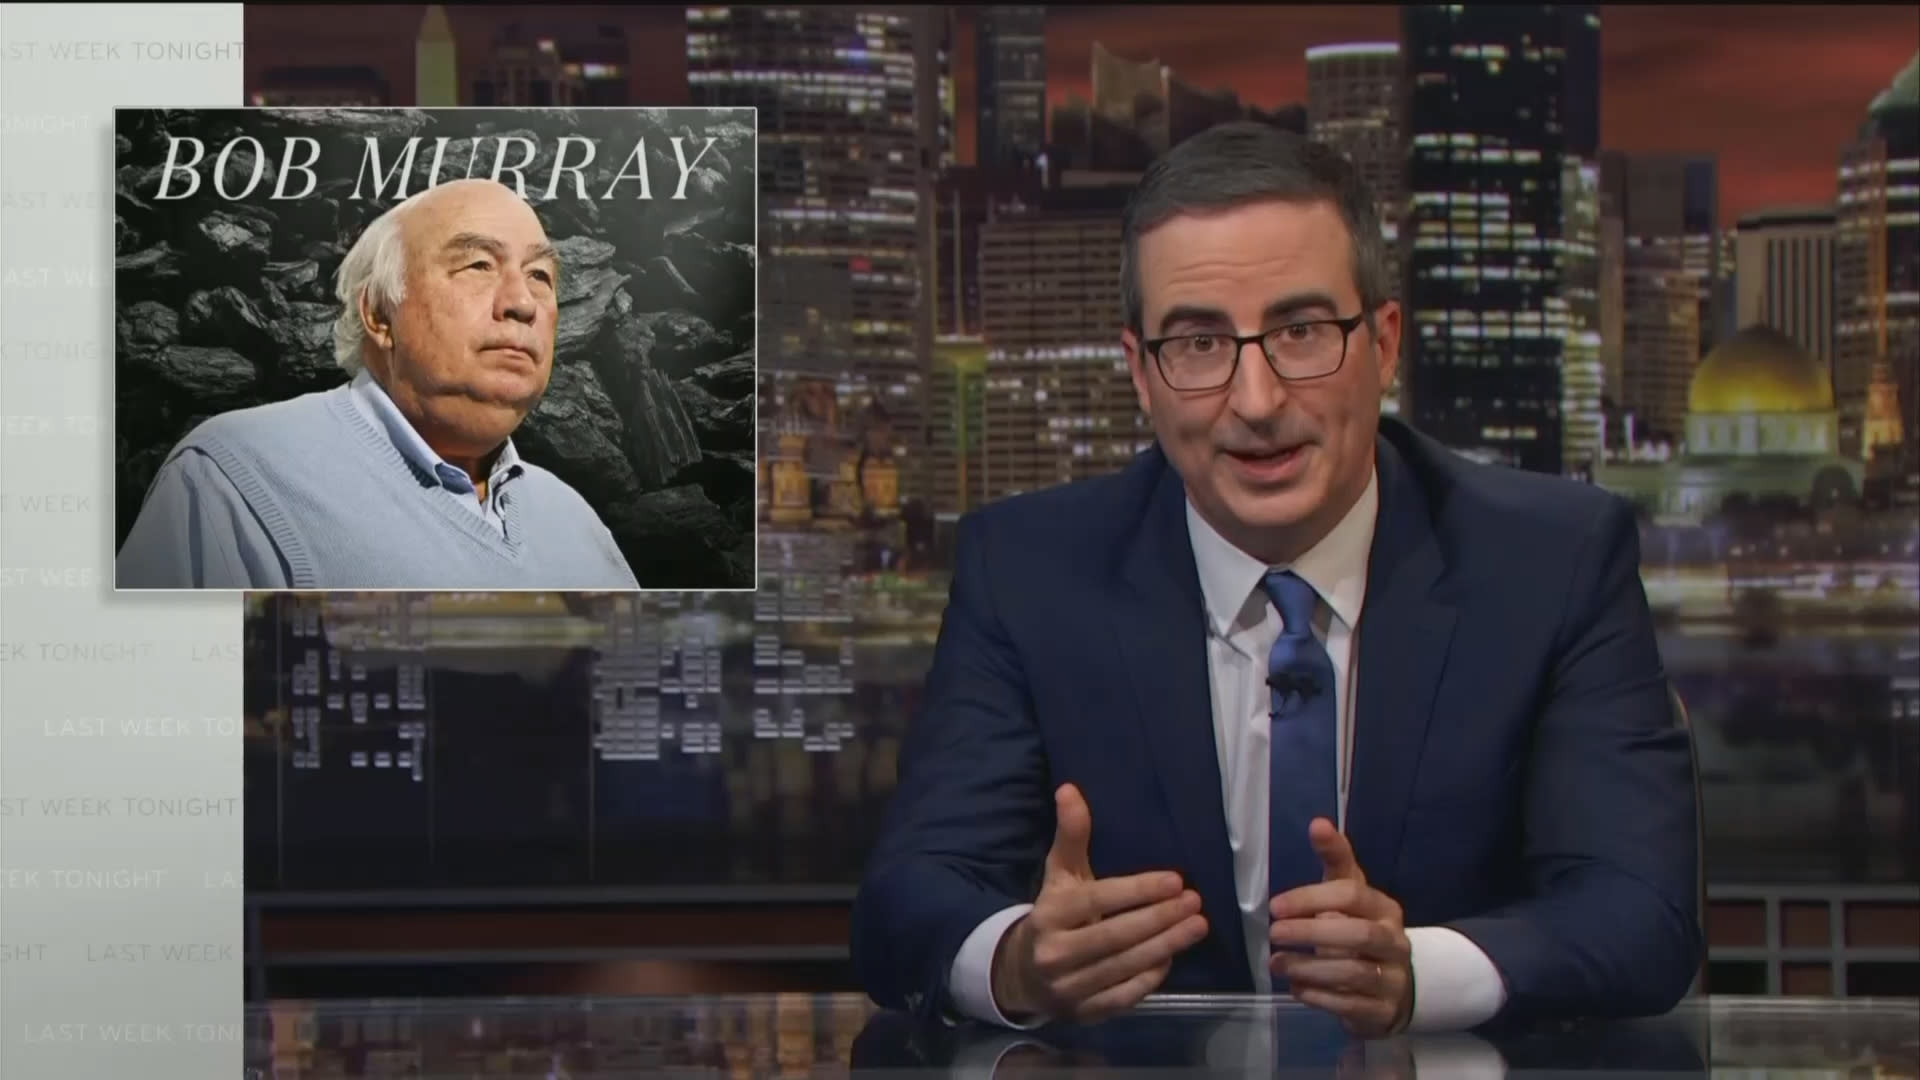 John Oliver mocks coal tycoon after 'bulls***' lawsuit is dropped - Yahoo News Canada